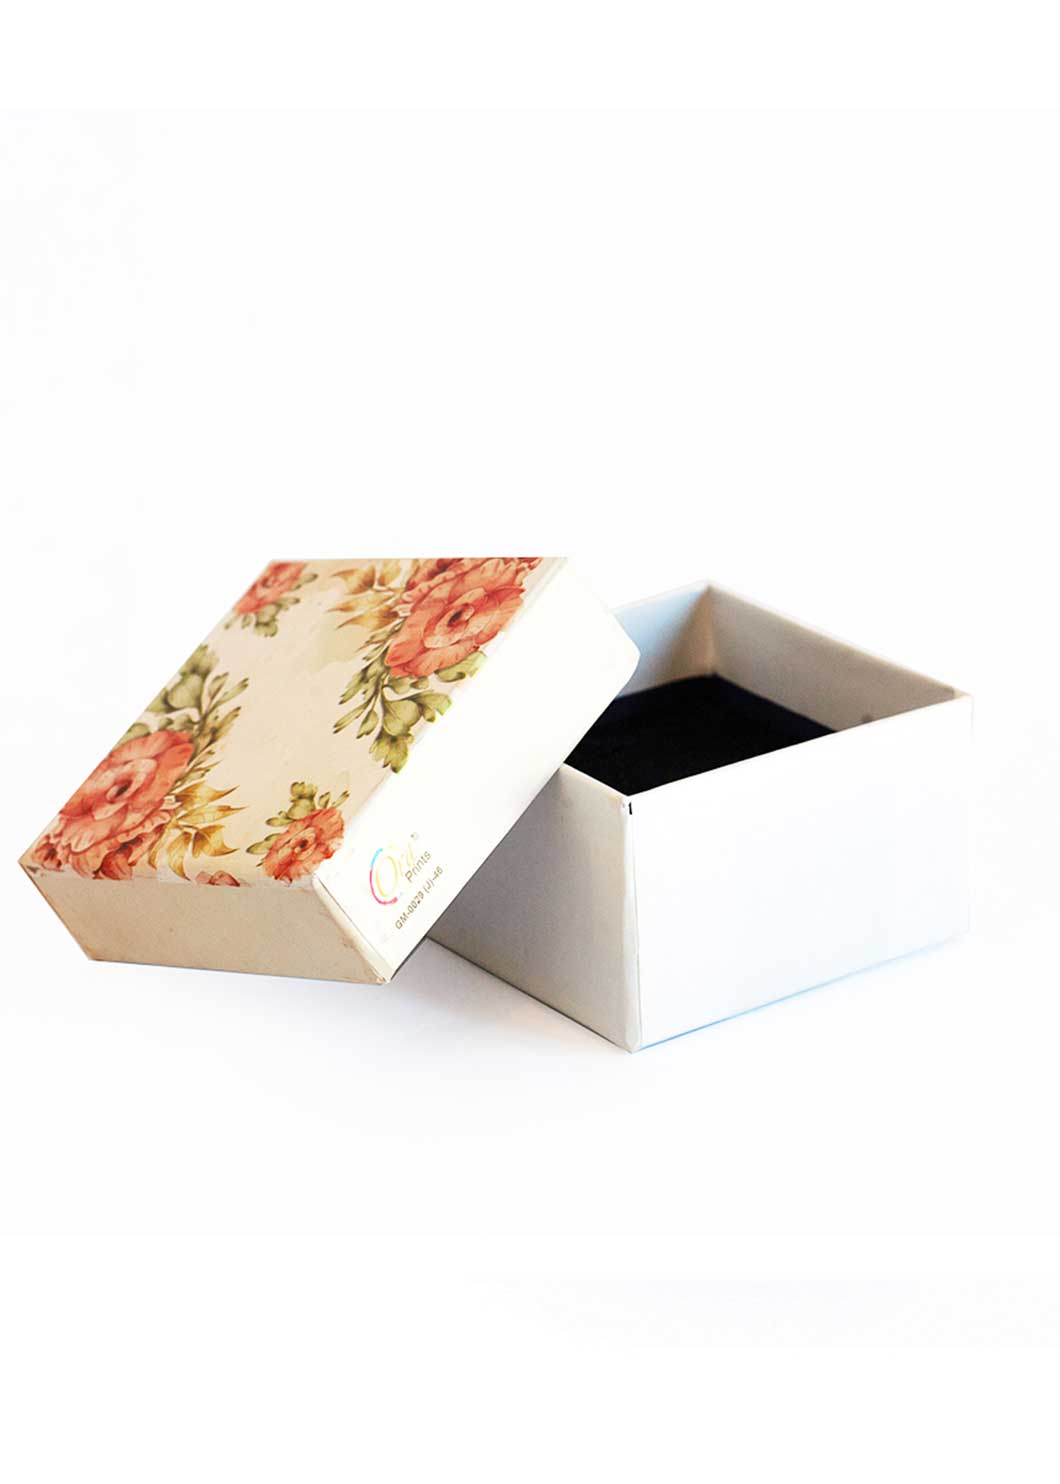 Off White Floral Design Box for Packing Gifts